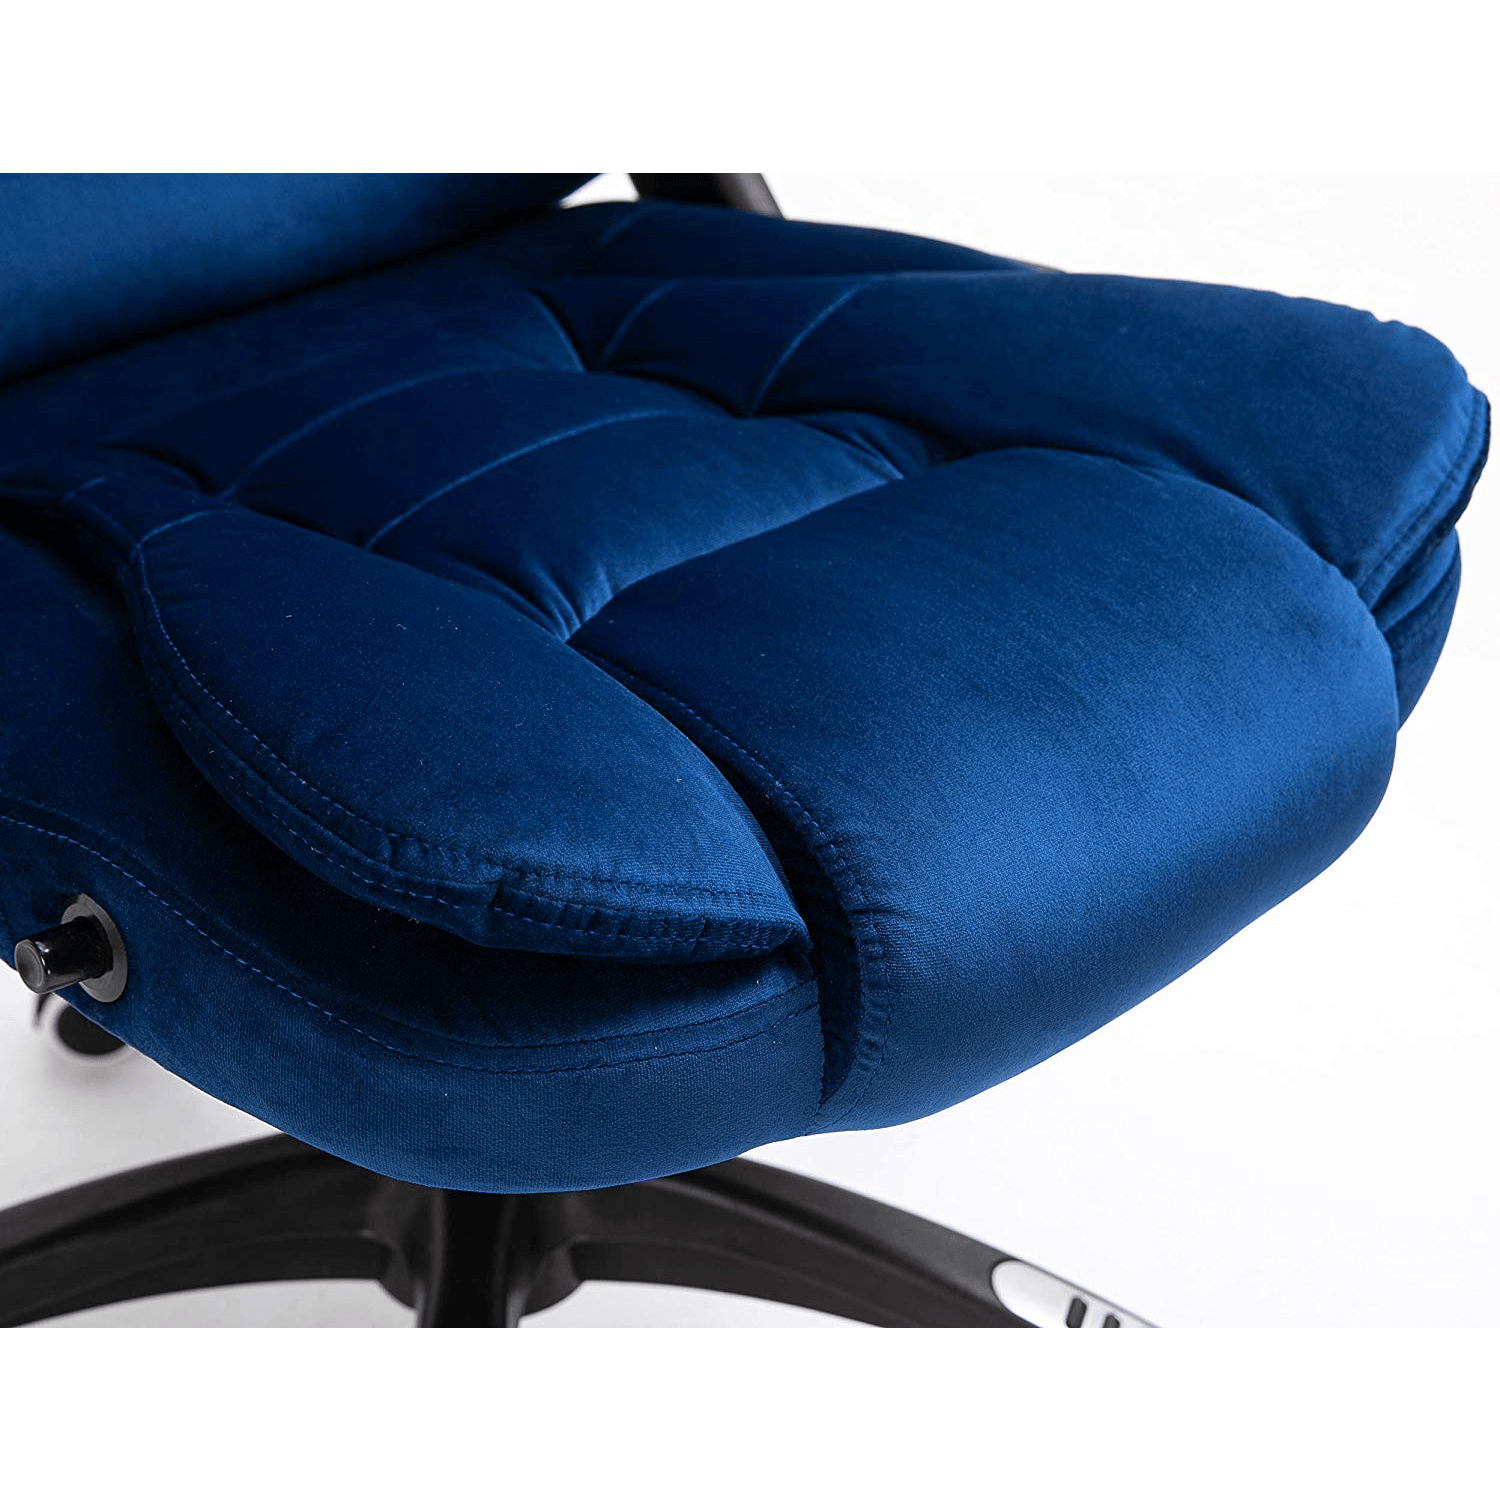 Cherry Tree Furniture Executive Recline Extra Padded Office Chair Standard, MO17 Blue Velvet